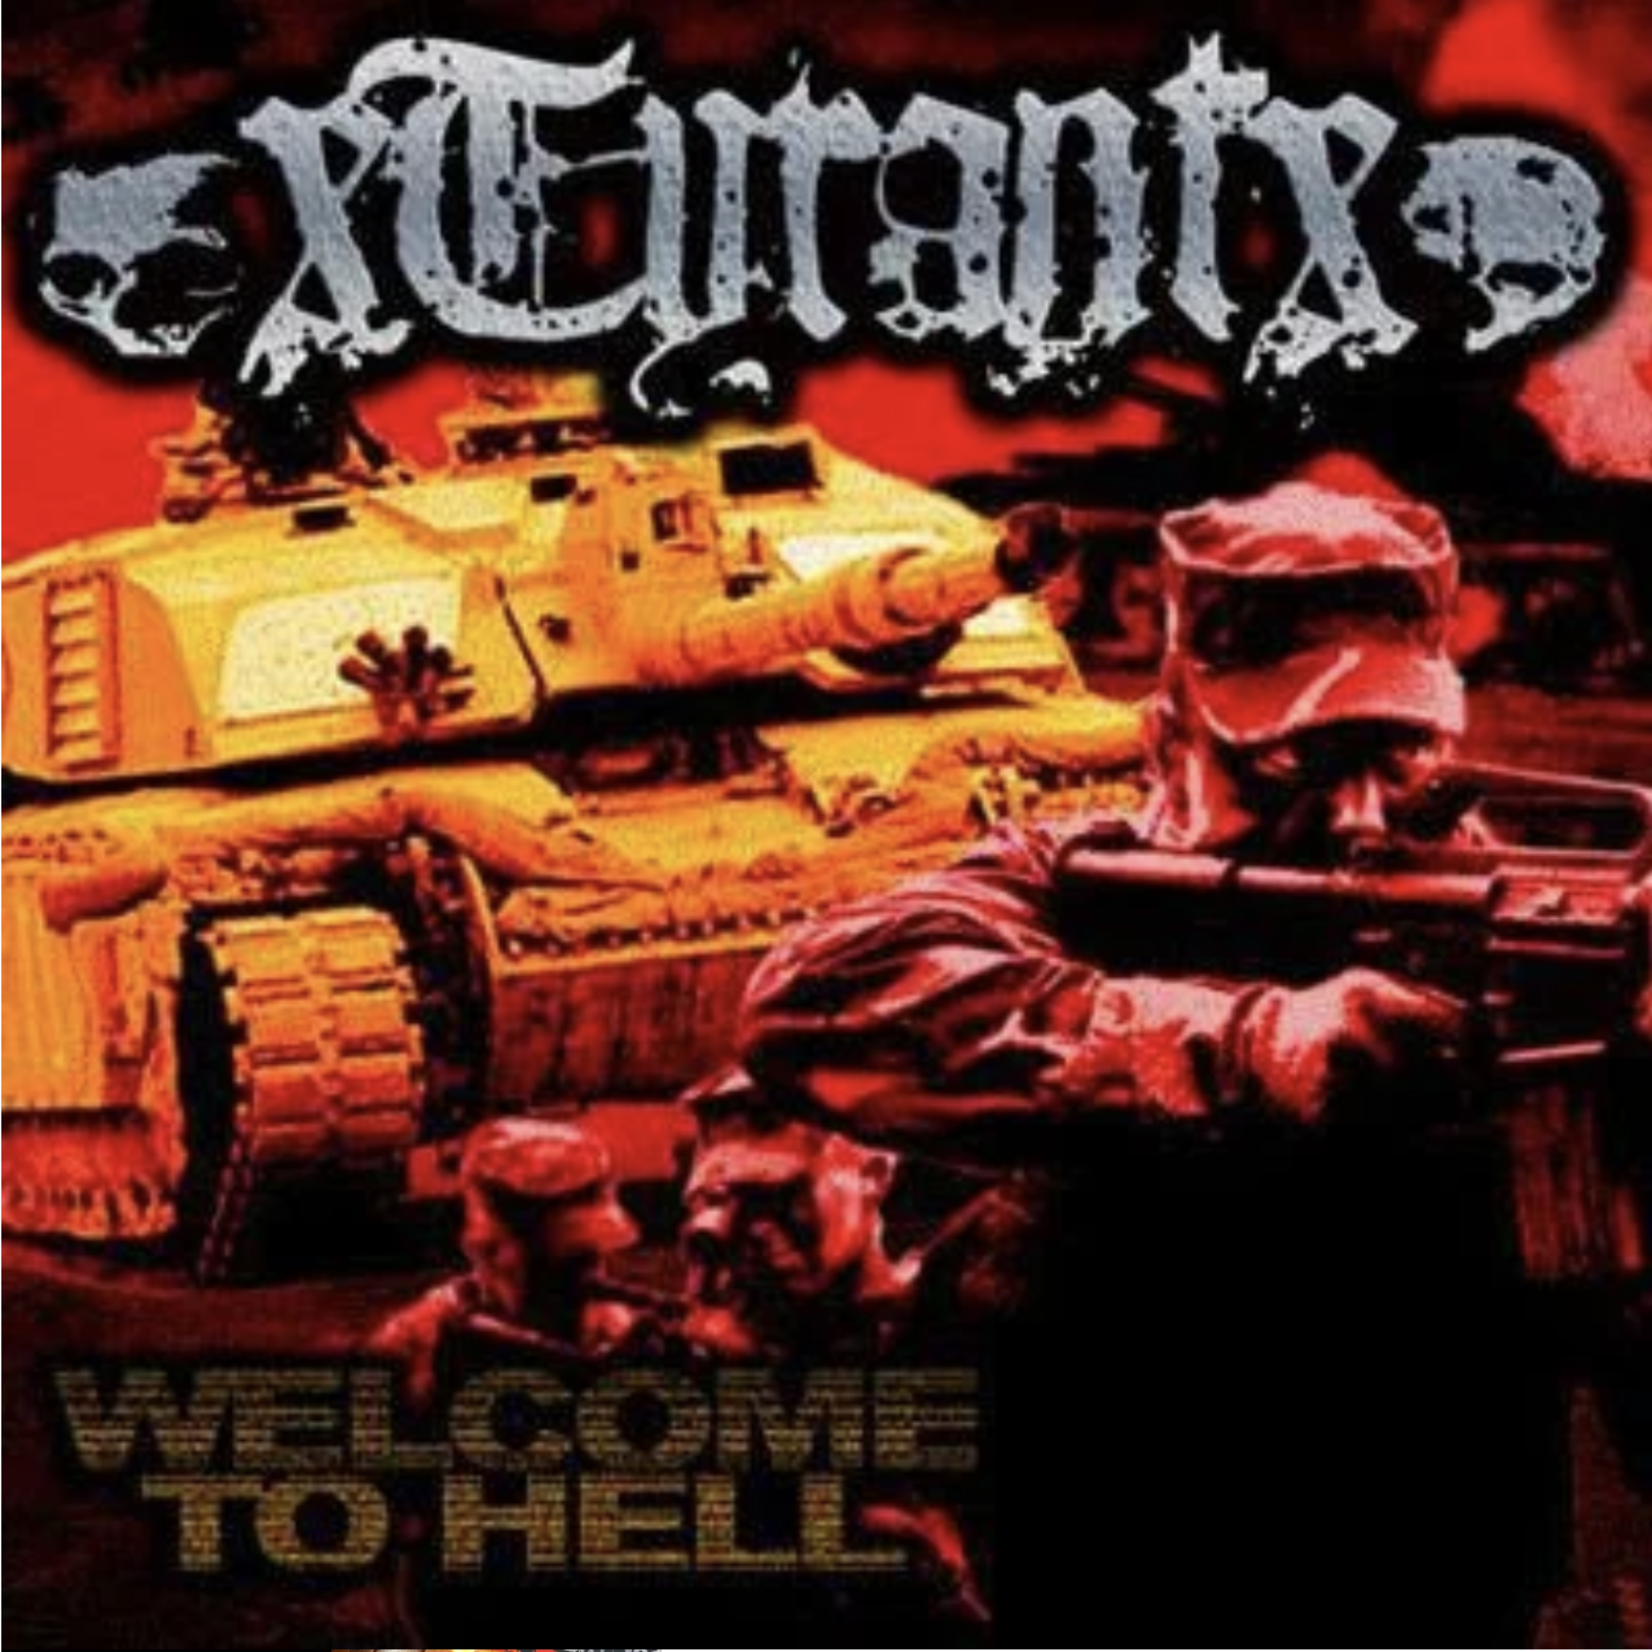 xTyrantx - Welcome To Hell (LP)